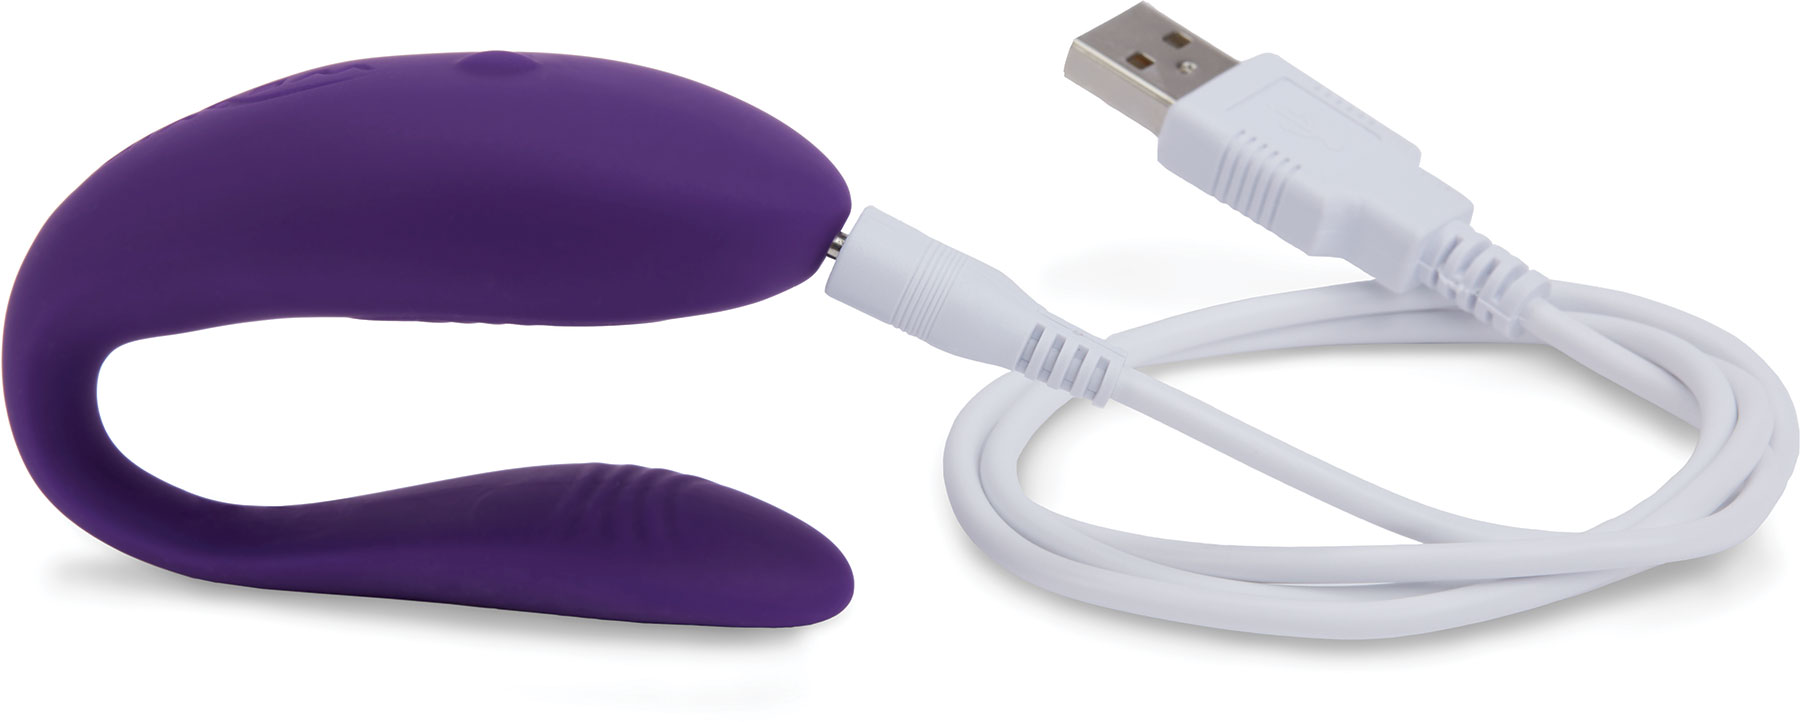 We-Vibe Unite Remote Controlled Couples Vibrator - Charging